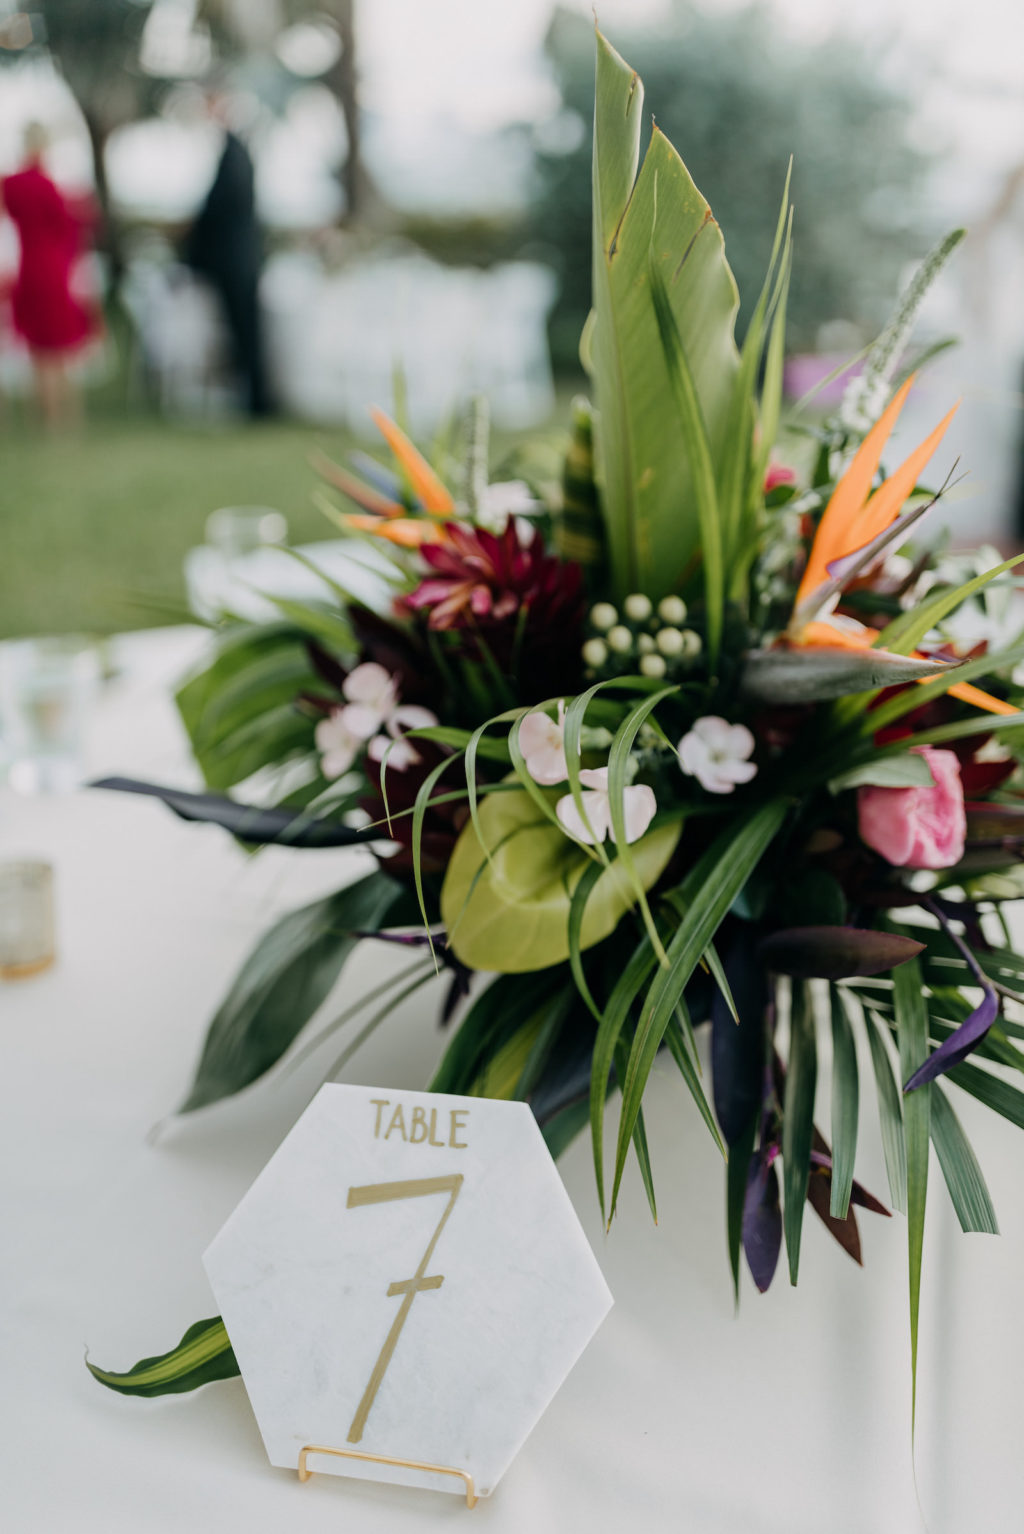 Tropical Elegant Wedding Reception Decor, Floral Centerpiece Orange Birds of Paradise, Pink Ginger, Palm Tree Leaves, White and Gold Geometric Table Number | Tampa Bay Wedding Photographer Amber McWhorter Photography